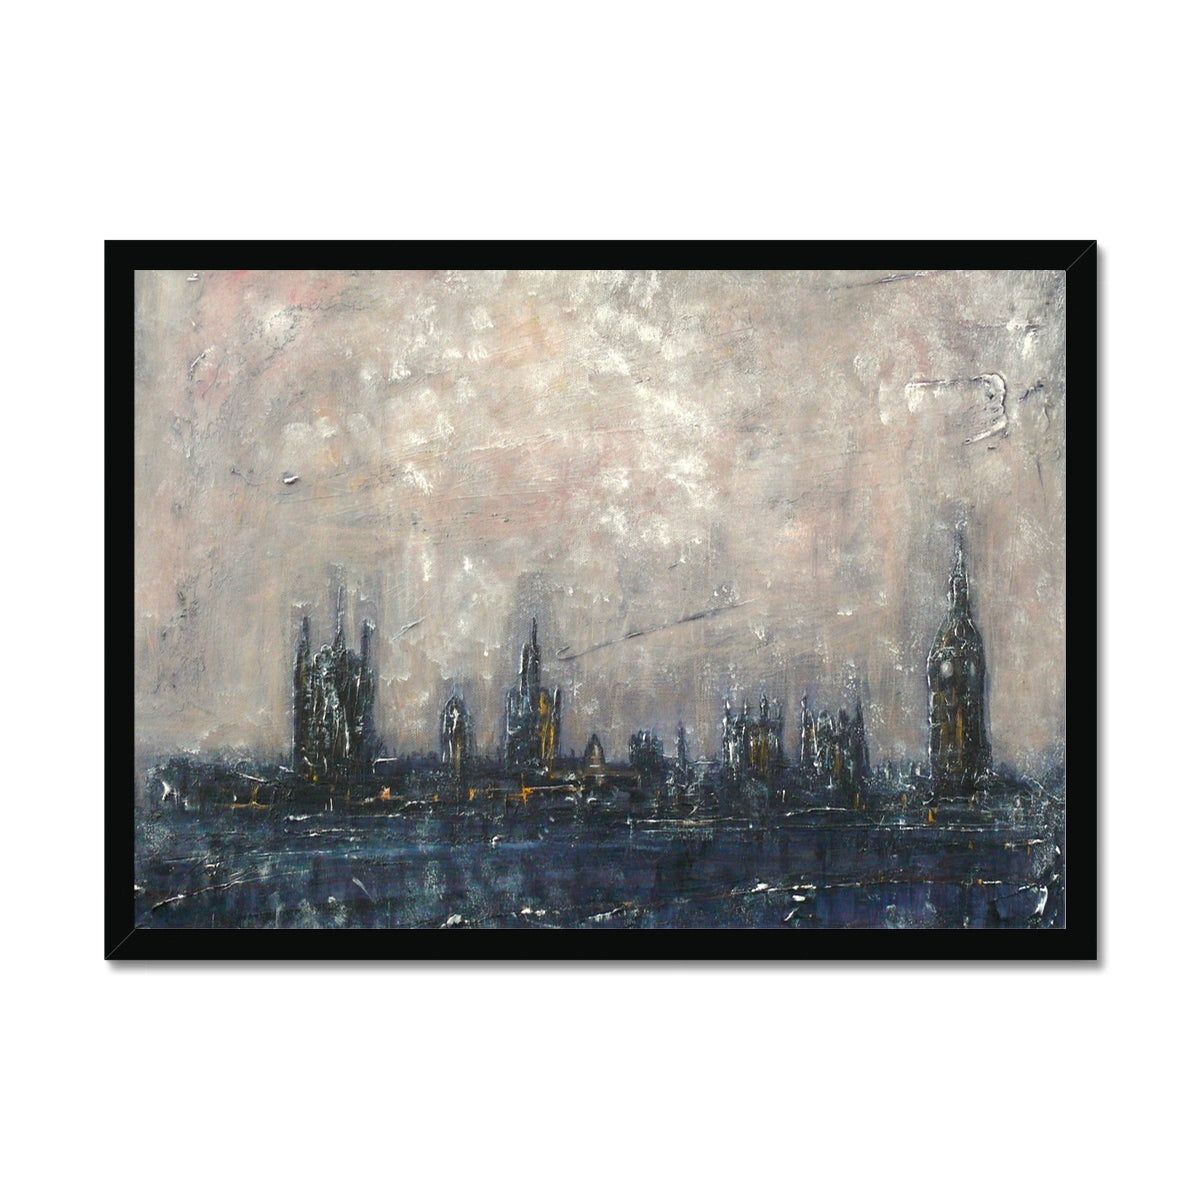 Winter In London Painting | Framed Prints From Scotland-Framed Prints-World Art Gallery-A2 Landscape-Black Frame-Paintings, Prints, Homeware, Art Gifts From Scotland By Scottish Artist Kevin Hunter